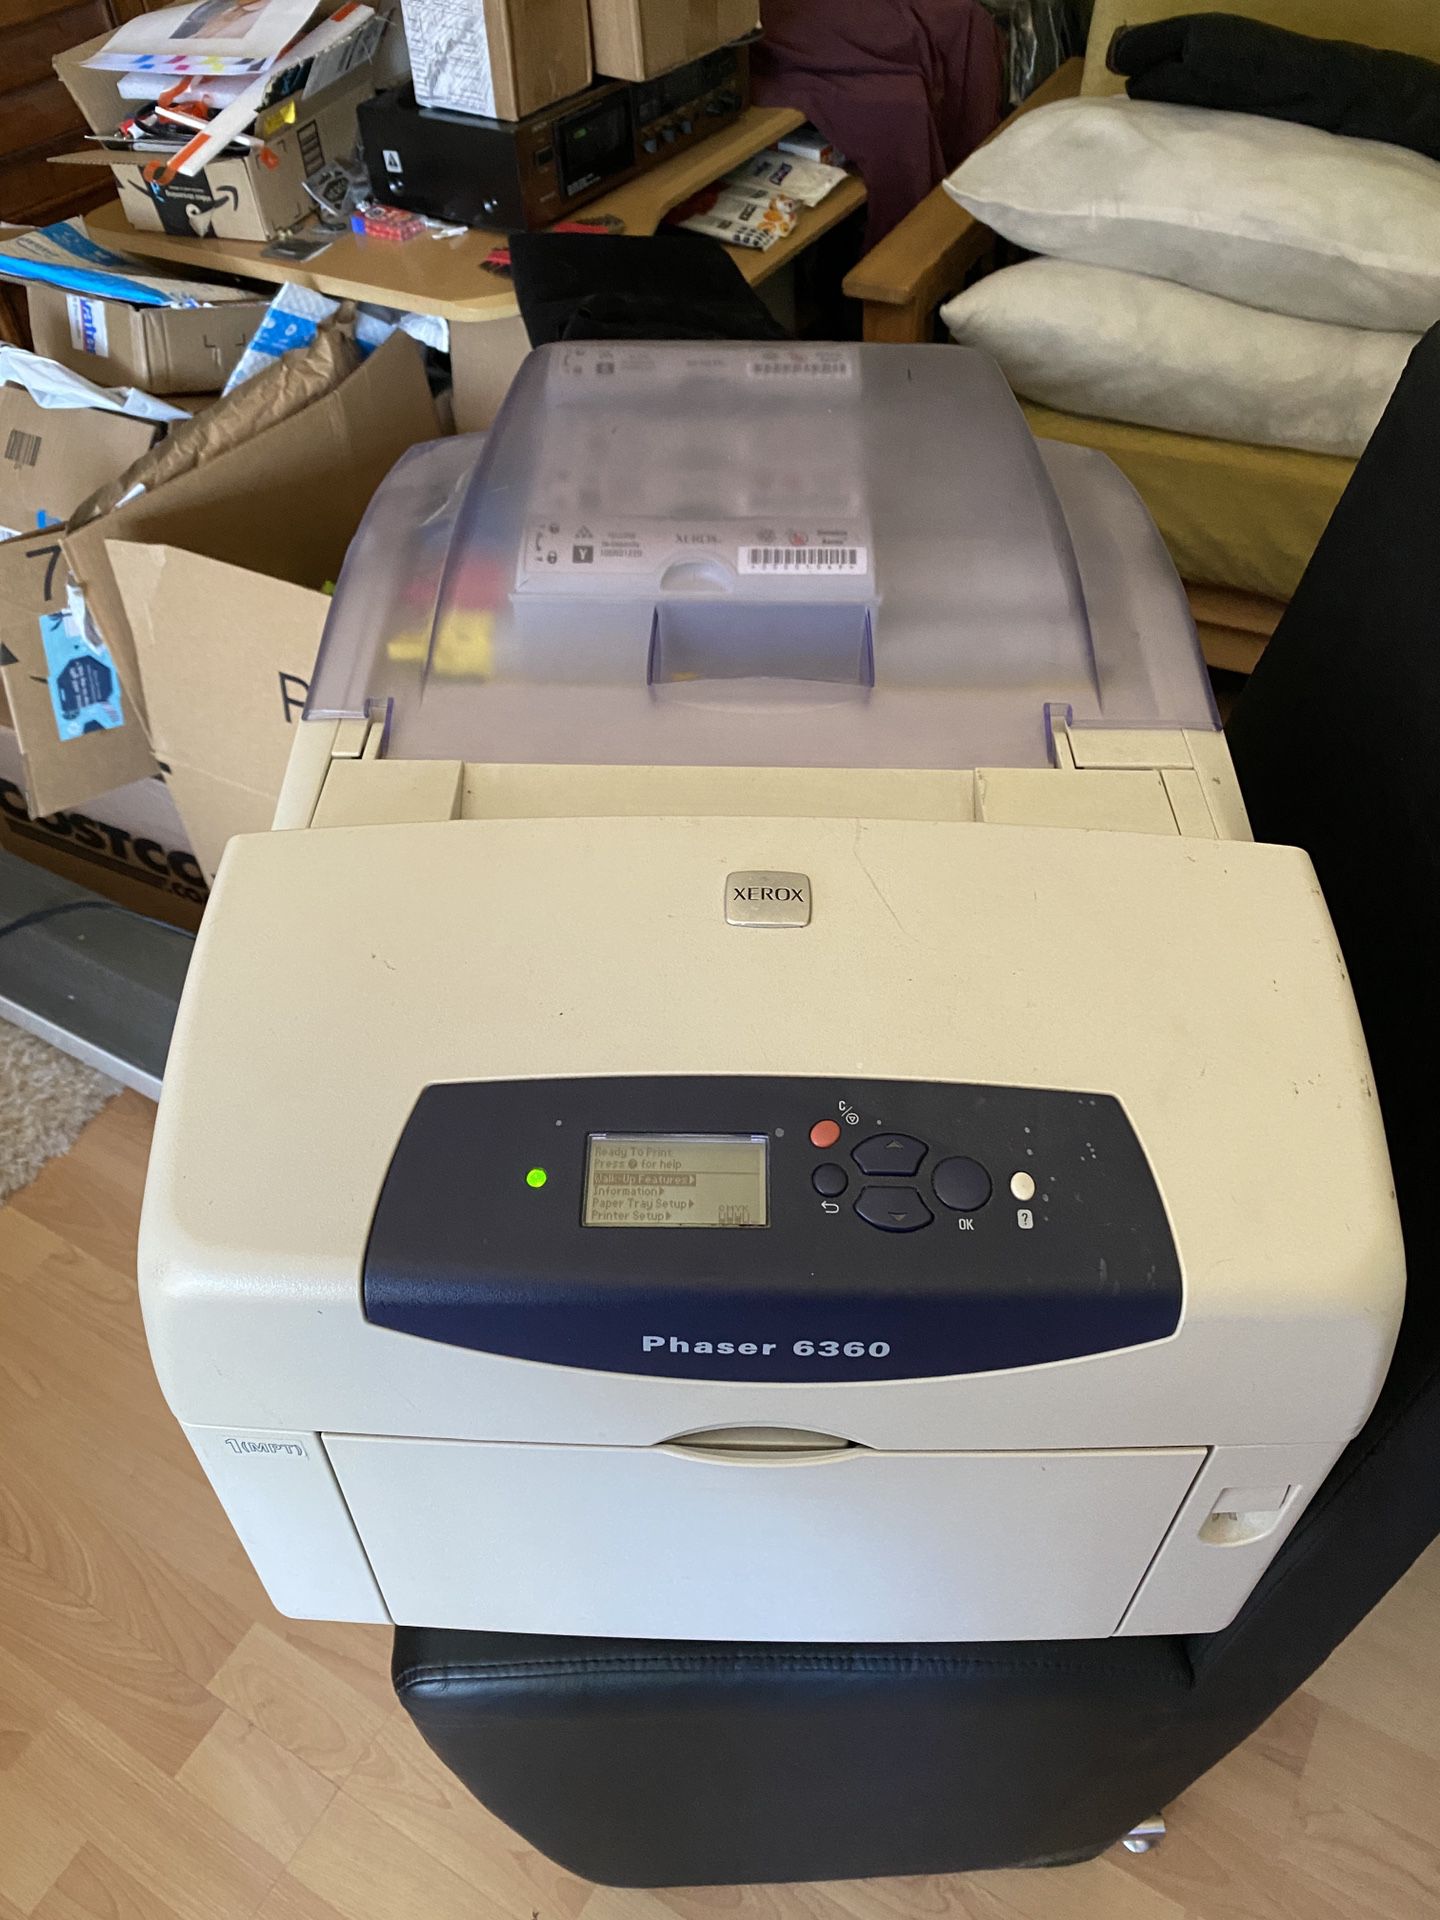 Xerox Laser Printer Phaser 6360 - 5,000 pages of ink left